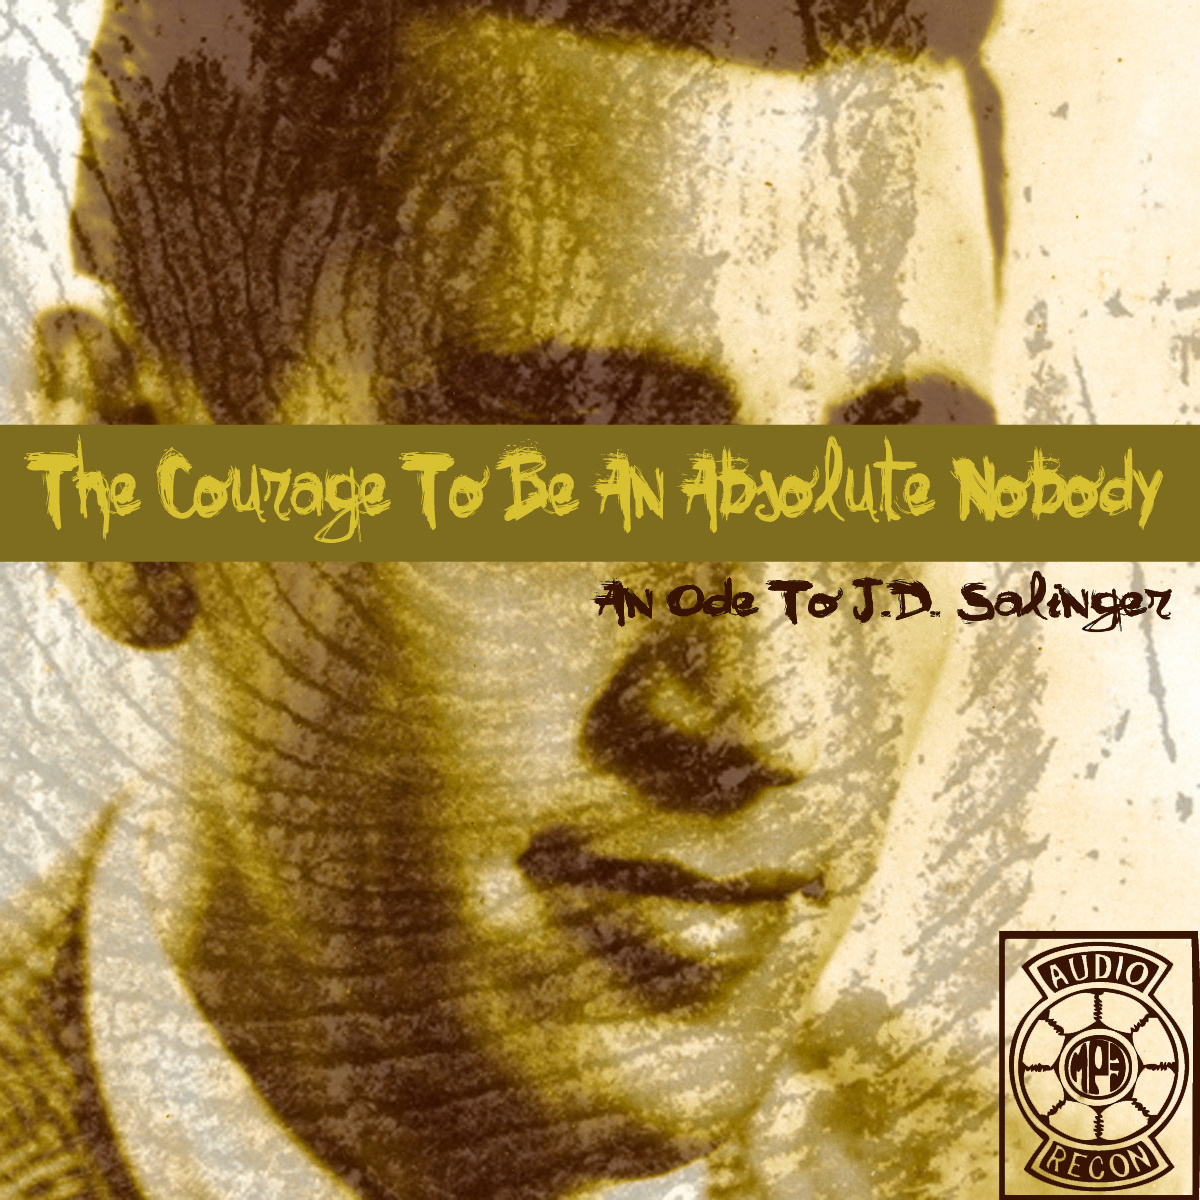 Audio Recon - "The Courage To Be An Absolute Nobody (An Ode To JD Salinger)" (Release)